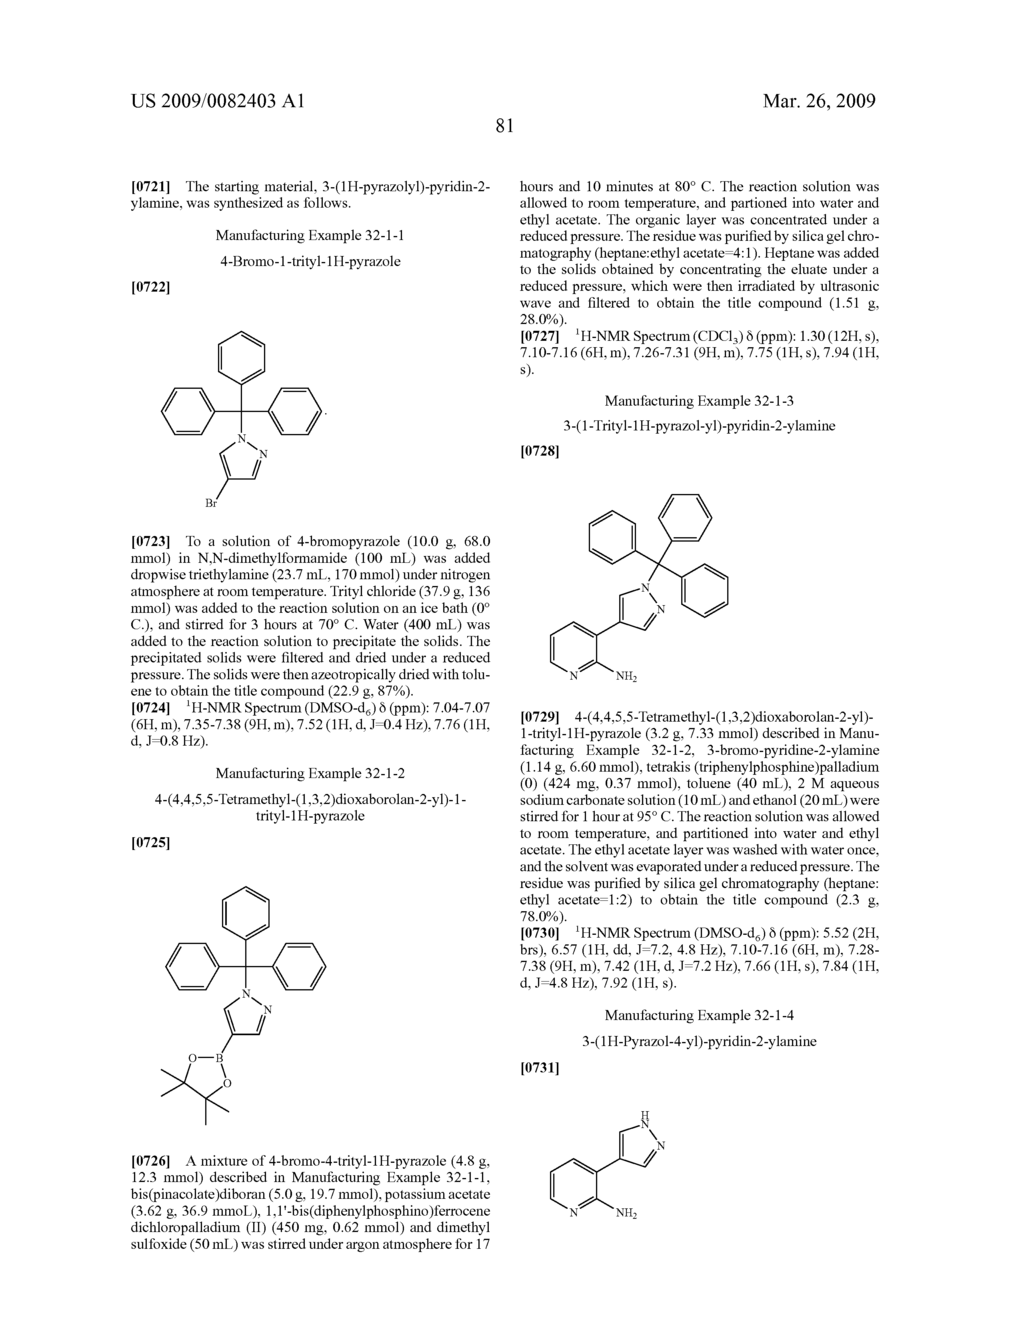 PYRIDINE DERIVATIVES SUBSTITUTED BY HETEROCYCLIC RING AND PHOSPHONOAMINO GROUP, AND ANTI-FUNGAL AGENT CONTAINING SAME - diagram, schematic, and image 82